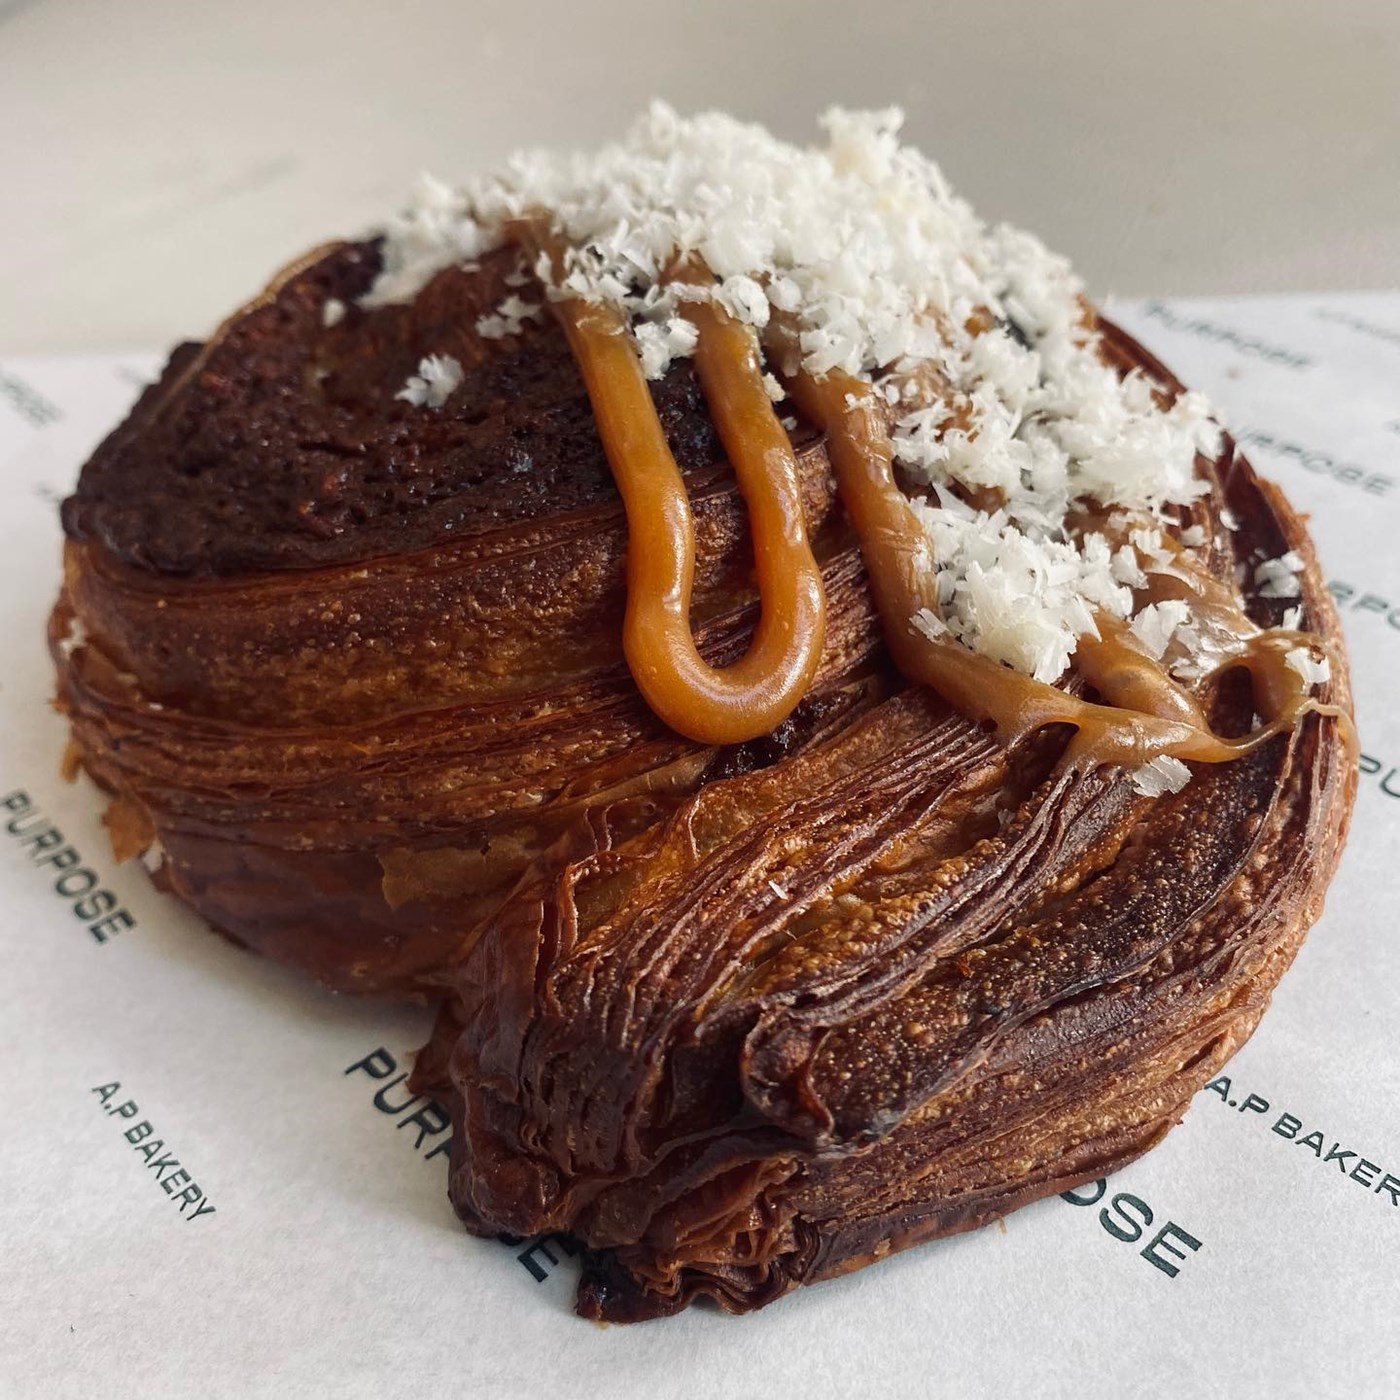 A crispy pastry from A.P. Bakery 